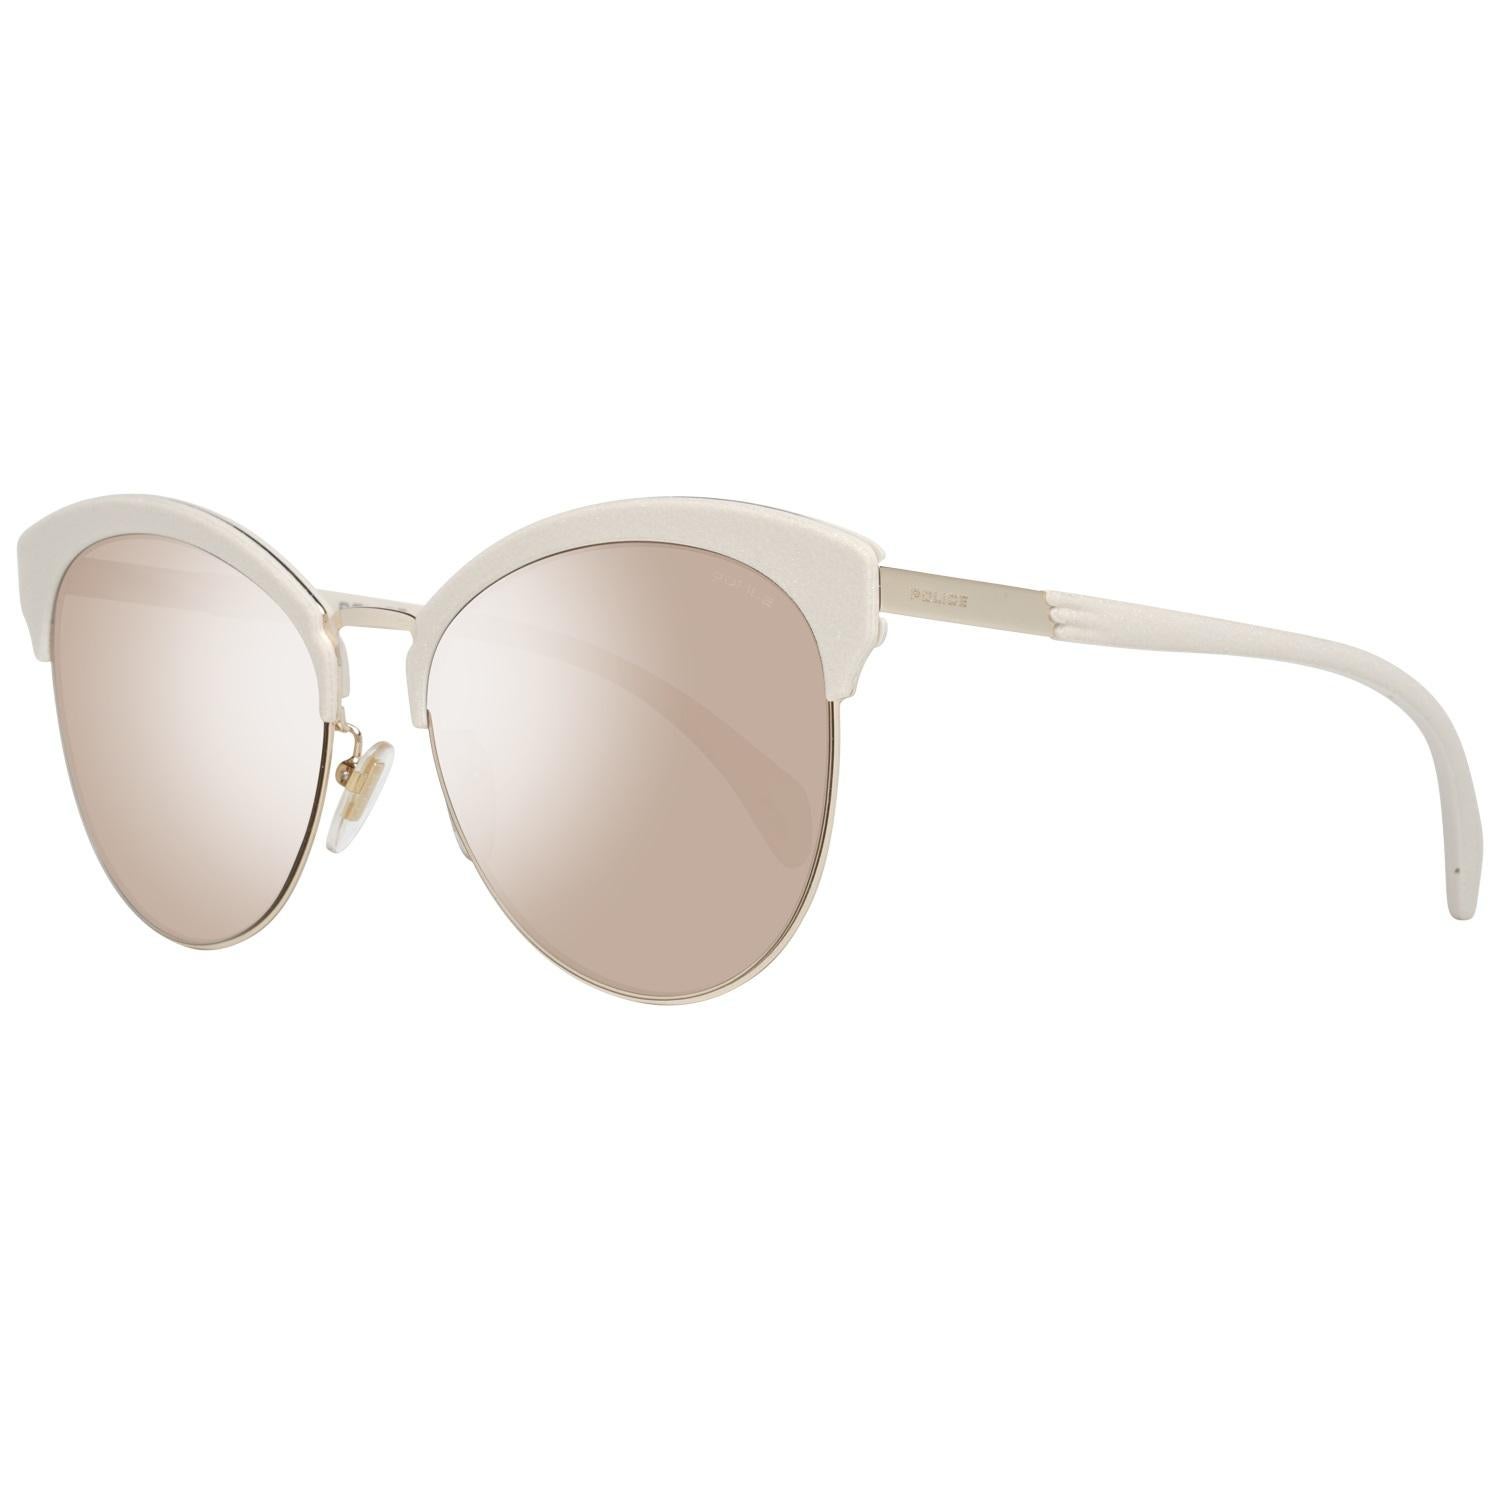 Details
MATERIAL: Metal
COLOR: Gold
MODEL: PL619 568FFK
GENDER: Women
COUNTRY OF MANUFACTURE: Italy
TYPE: Sunglasses
ORIGINAL CASE?: Yes
STYLE: Oval
OCCASION: Casual
FEATURES: Lightweight
LENS COLOR: Gold
LENS TECHNOLOGY: Mirrored
YEAR MANUFACTURED: